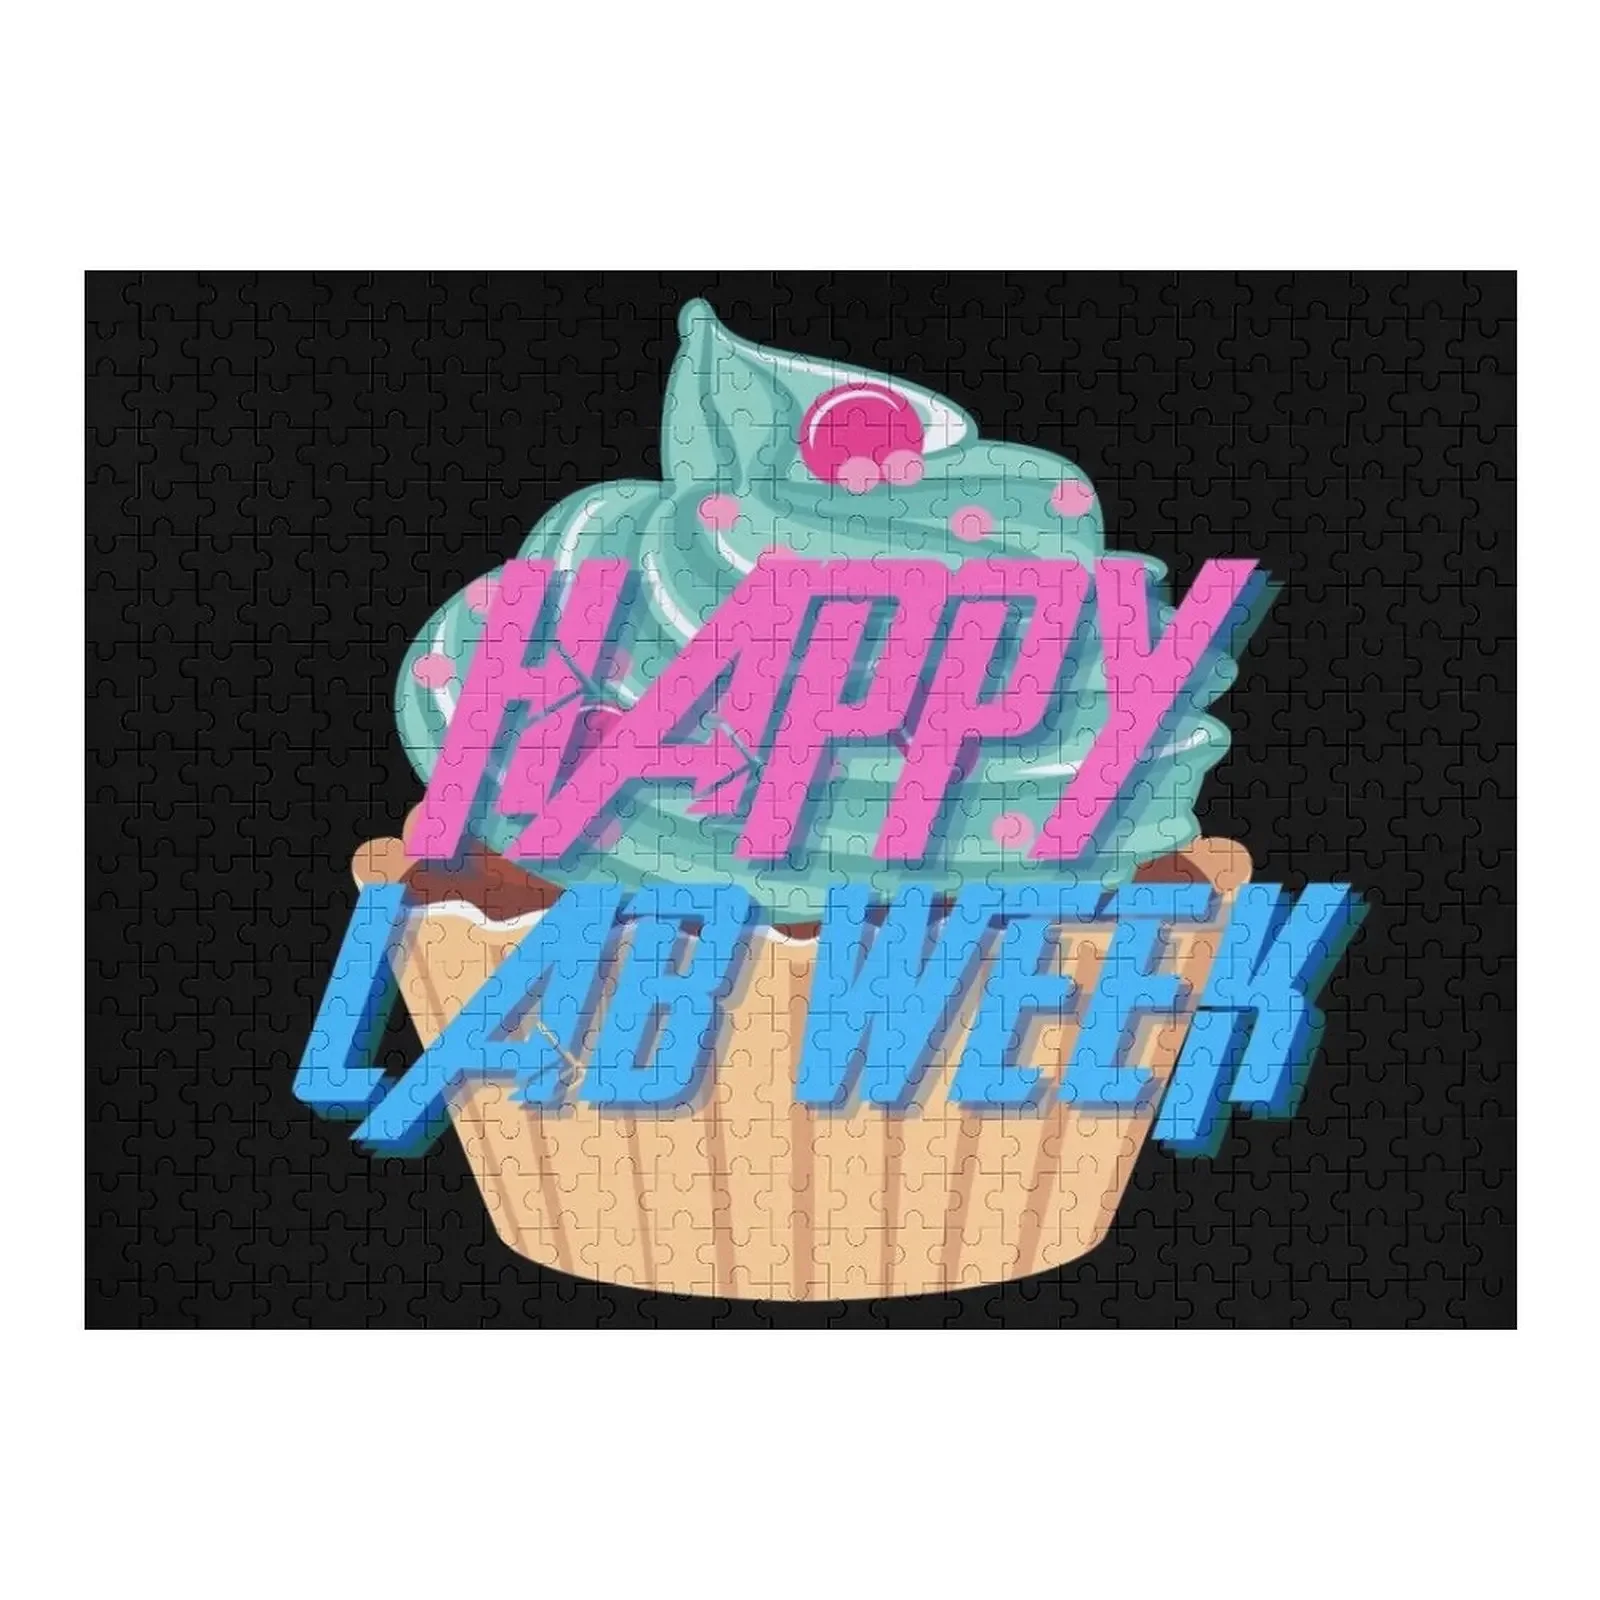 HAPPY LAB WEEK CUPCAKE MEDICAL LABORATORY SCIENTIST Jigsaw Puzzle Anime Wooden Decor Paintings Wooden Animal Puzzle